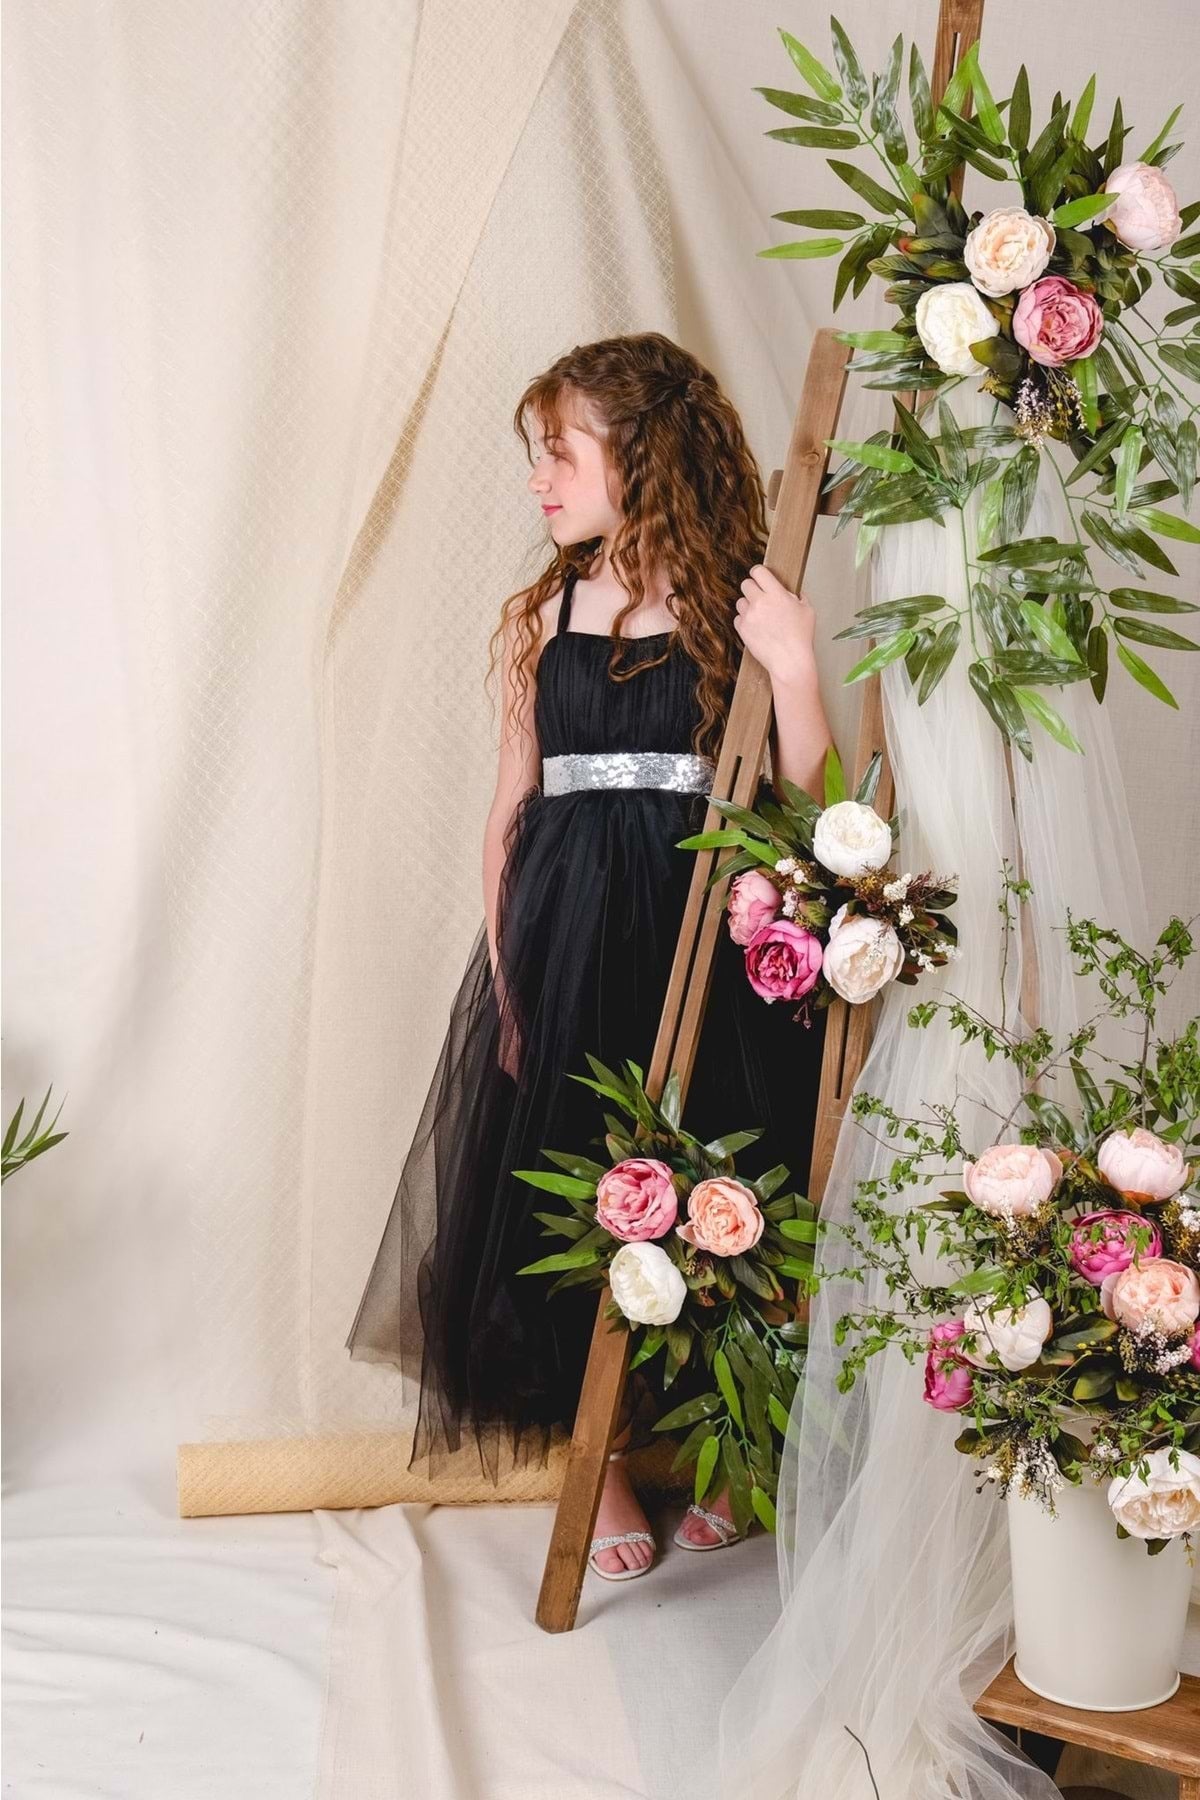 Girl's Satin Evening Dress with Back Gipe and Tulle Black